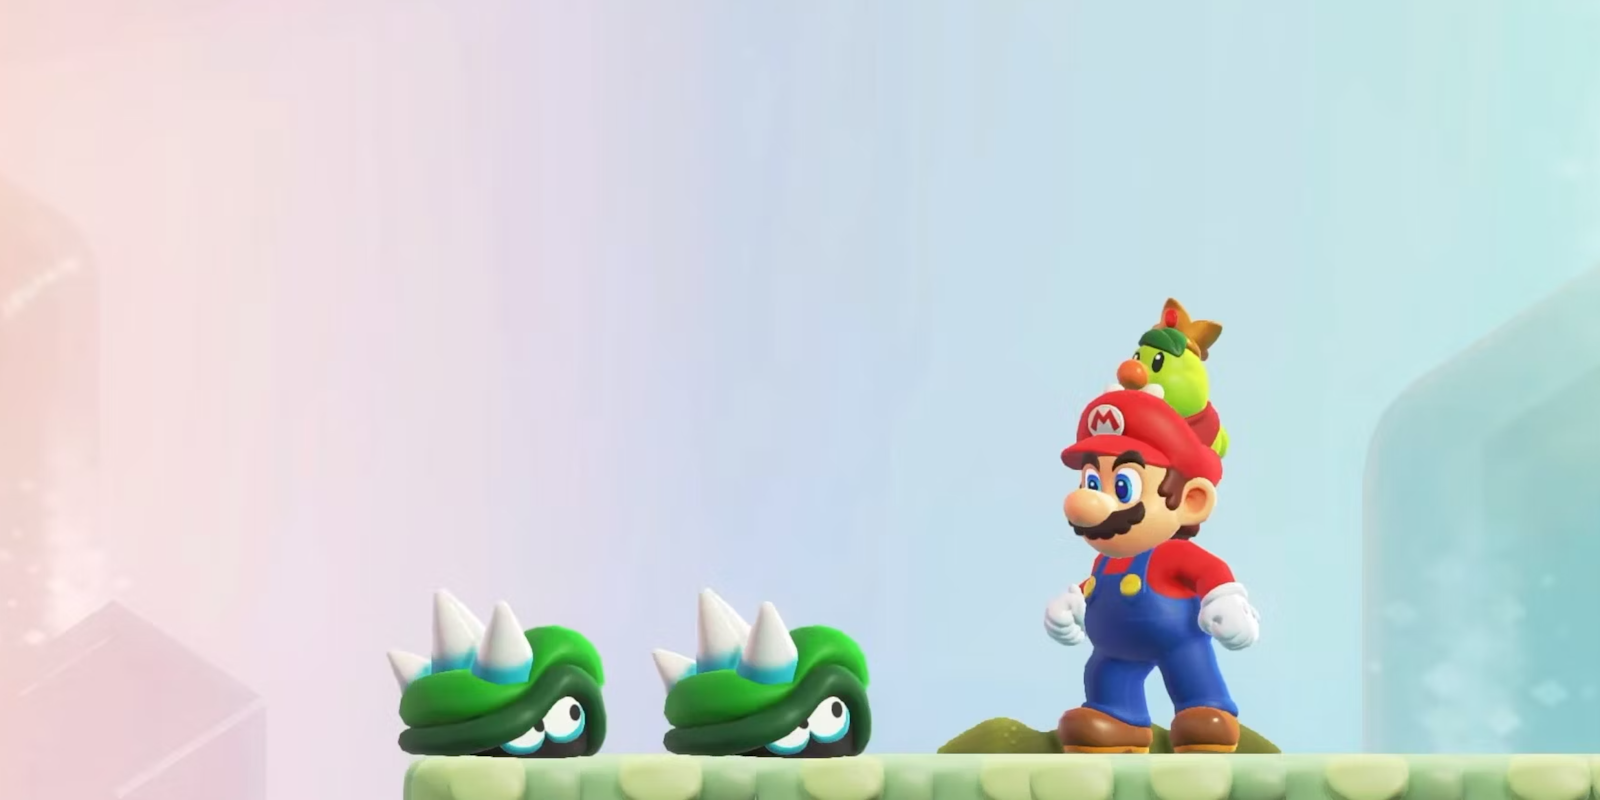 All new enemies and friends in the new super mario bros wonder trailer : r/ Mario